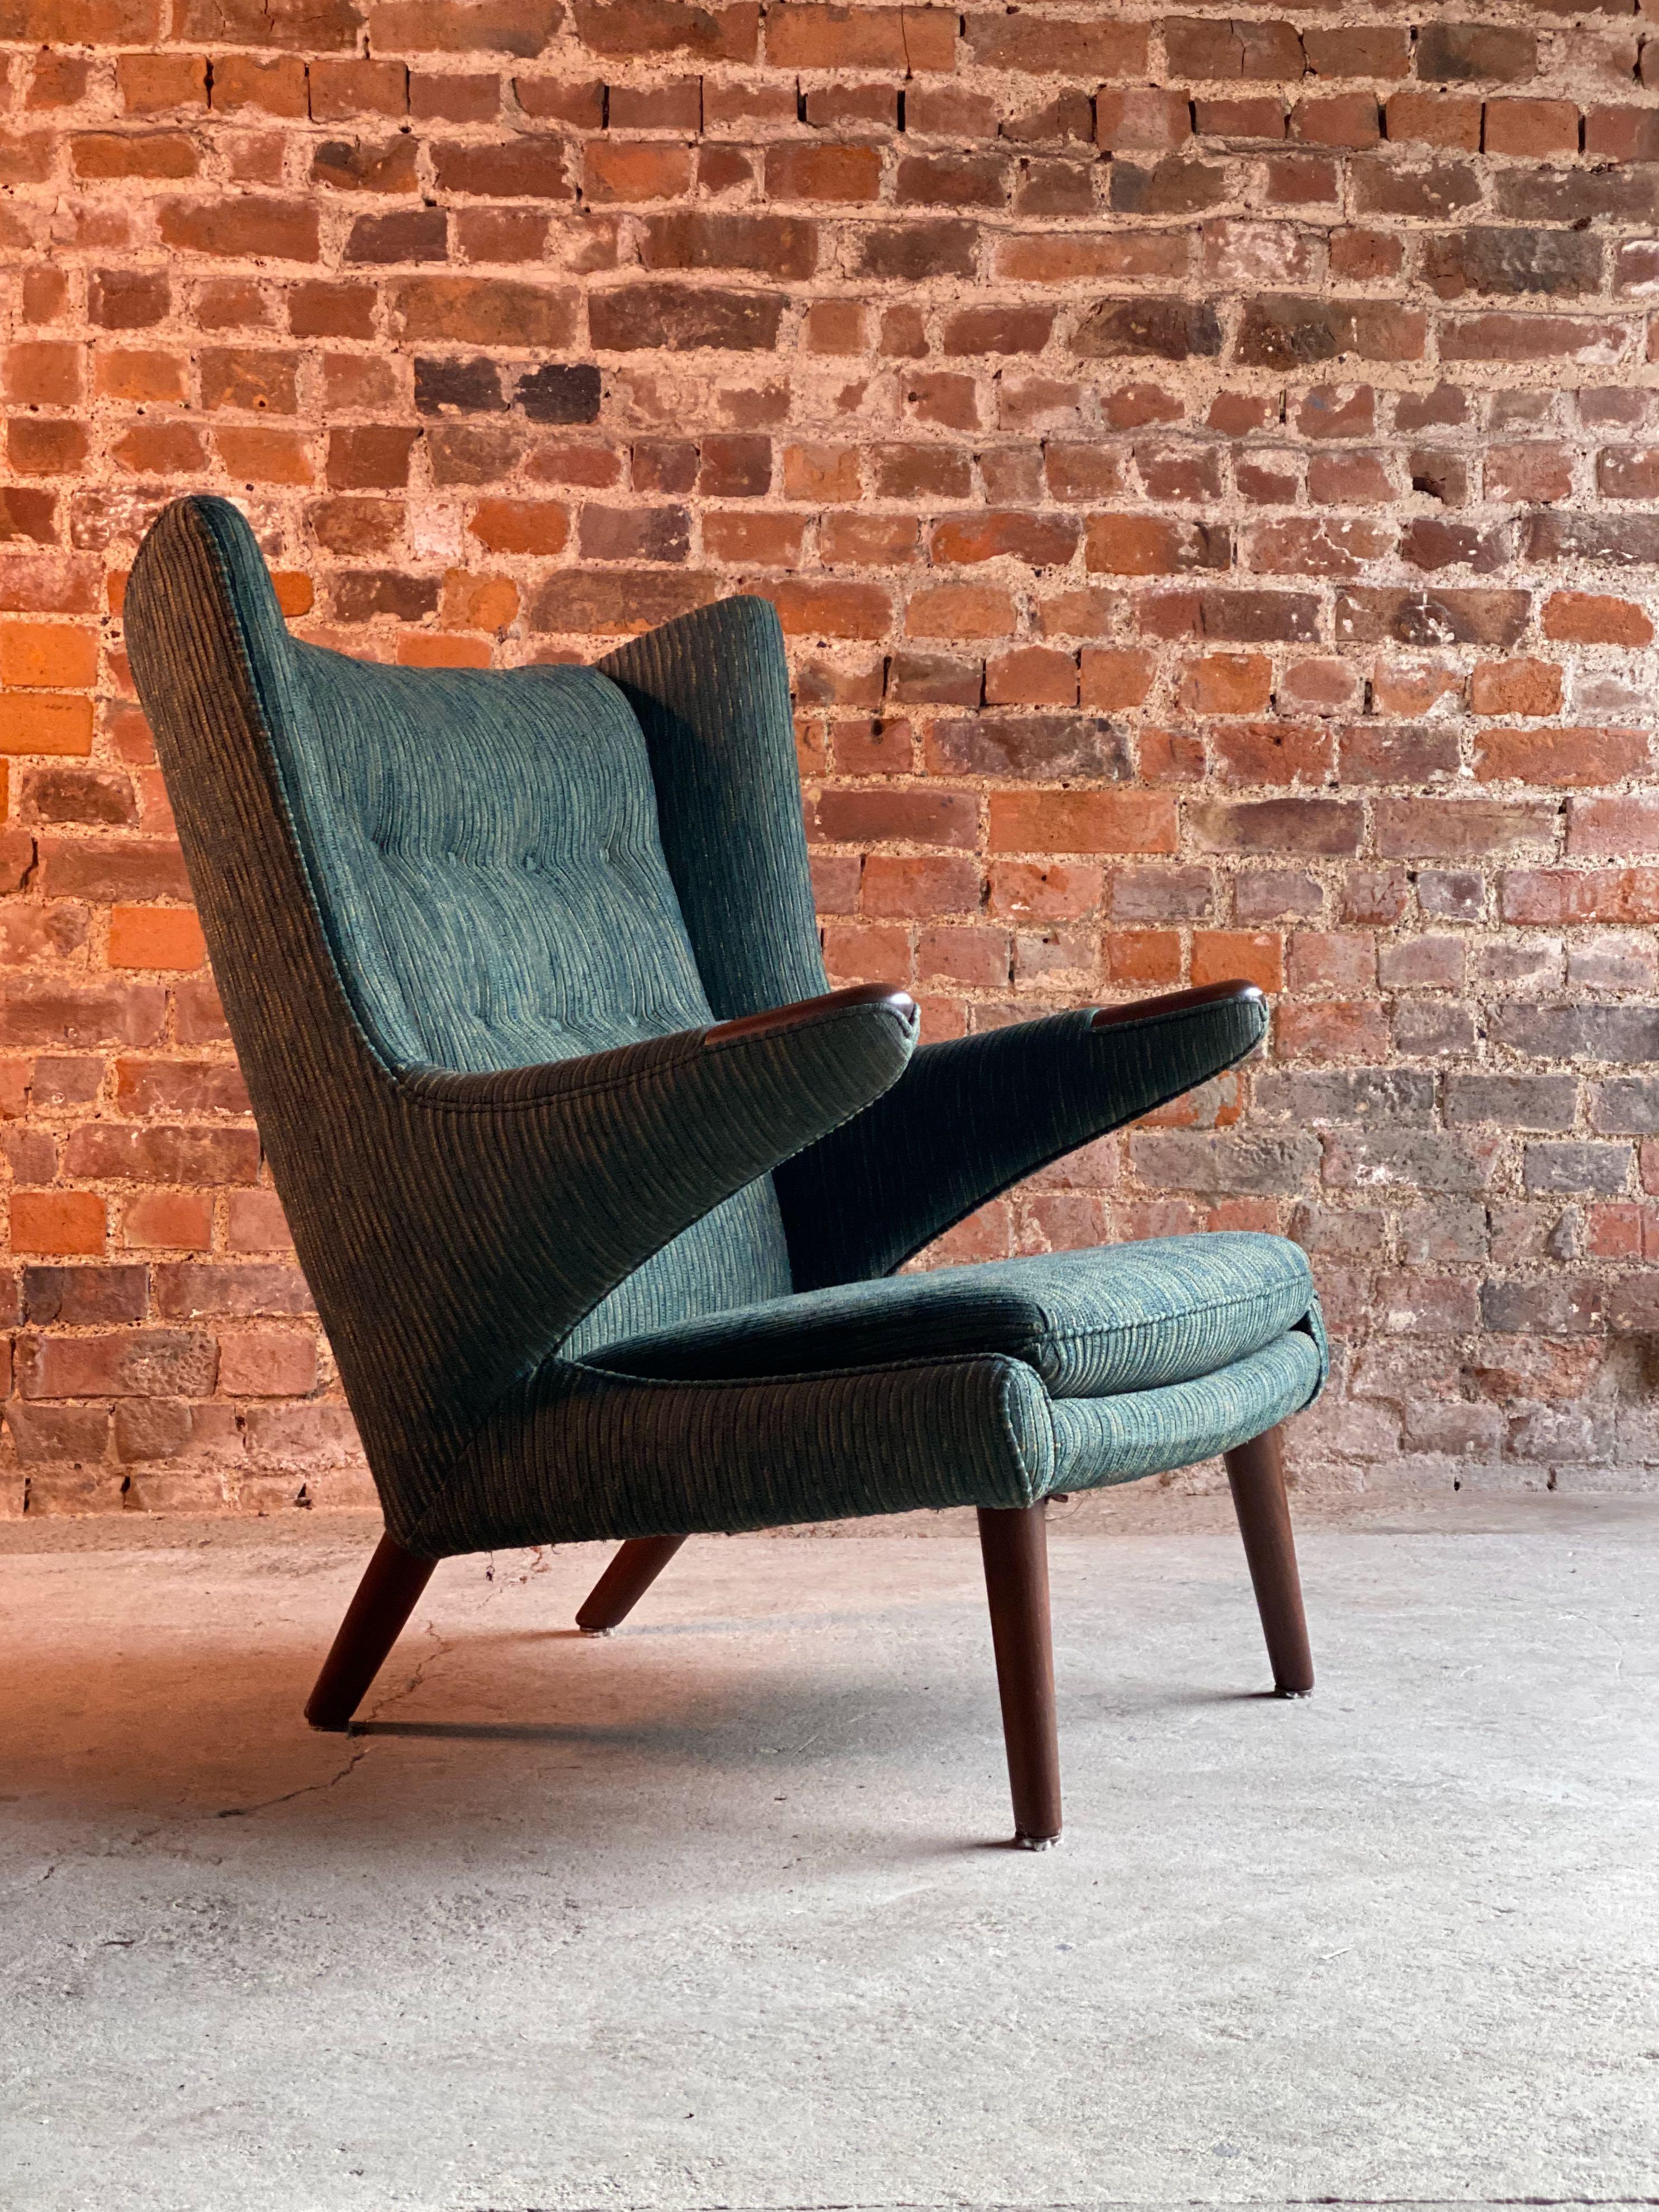 Hans Wegner papa bear lounge chair Bamsestol model AP19, Denmark, 1959

We are is delighted to offer this exceptional Hans J Wegner 'Papa Bear' chair Model AP19 circa 1959, otherwise known as a 'Bamsestol', designed in 1951, created by A.P Stolen